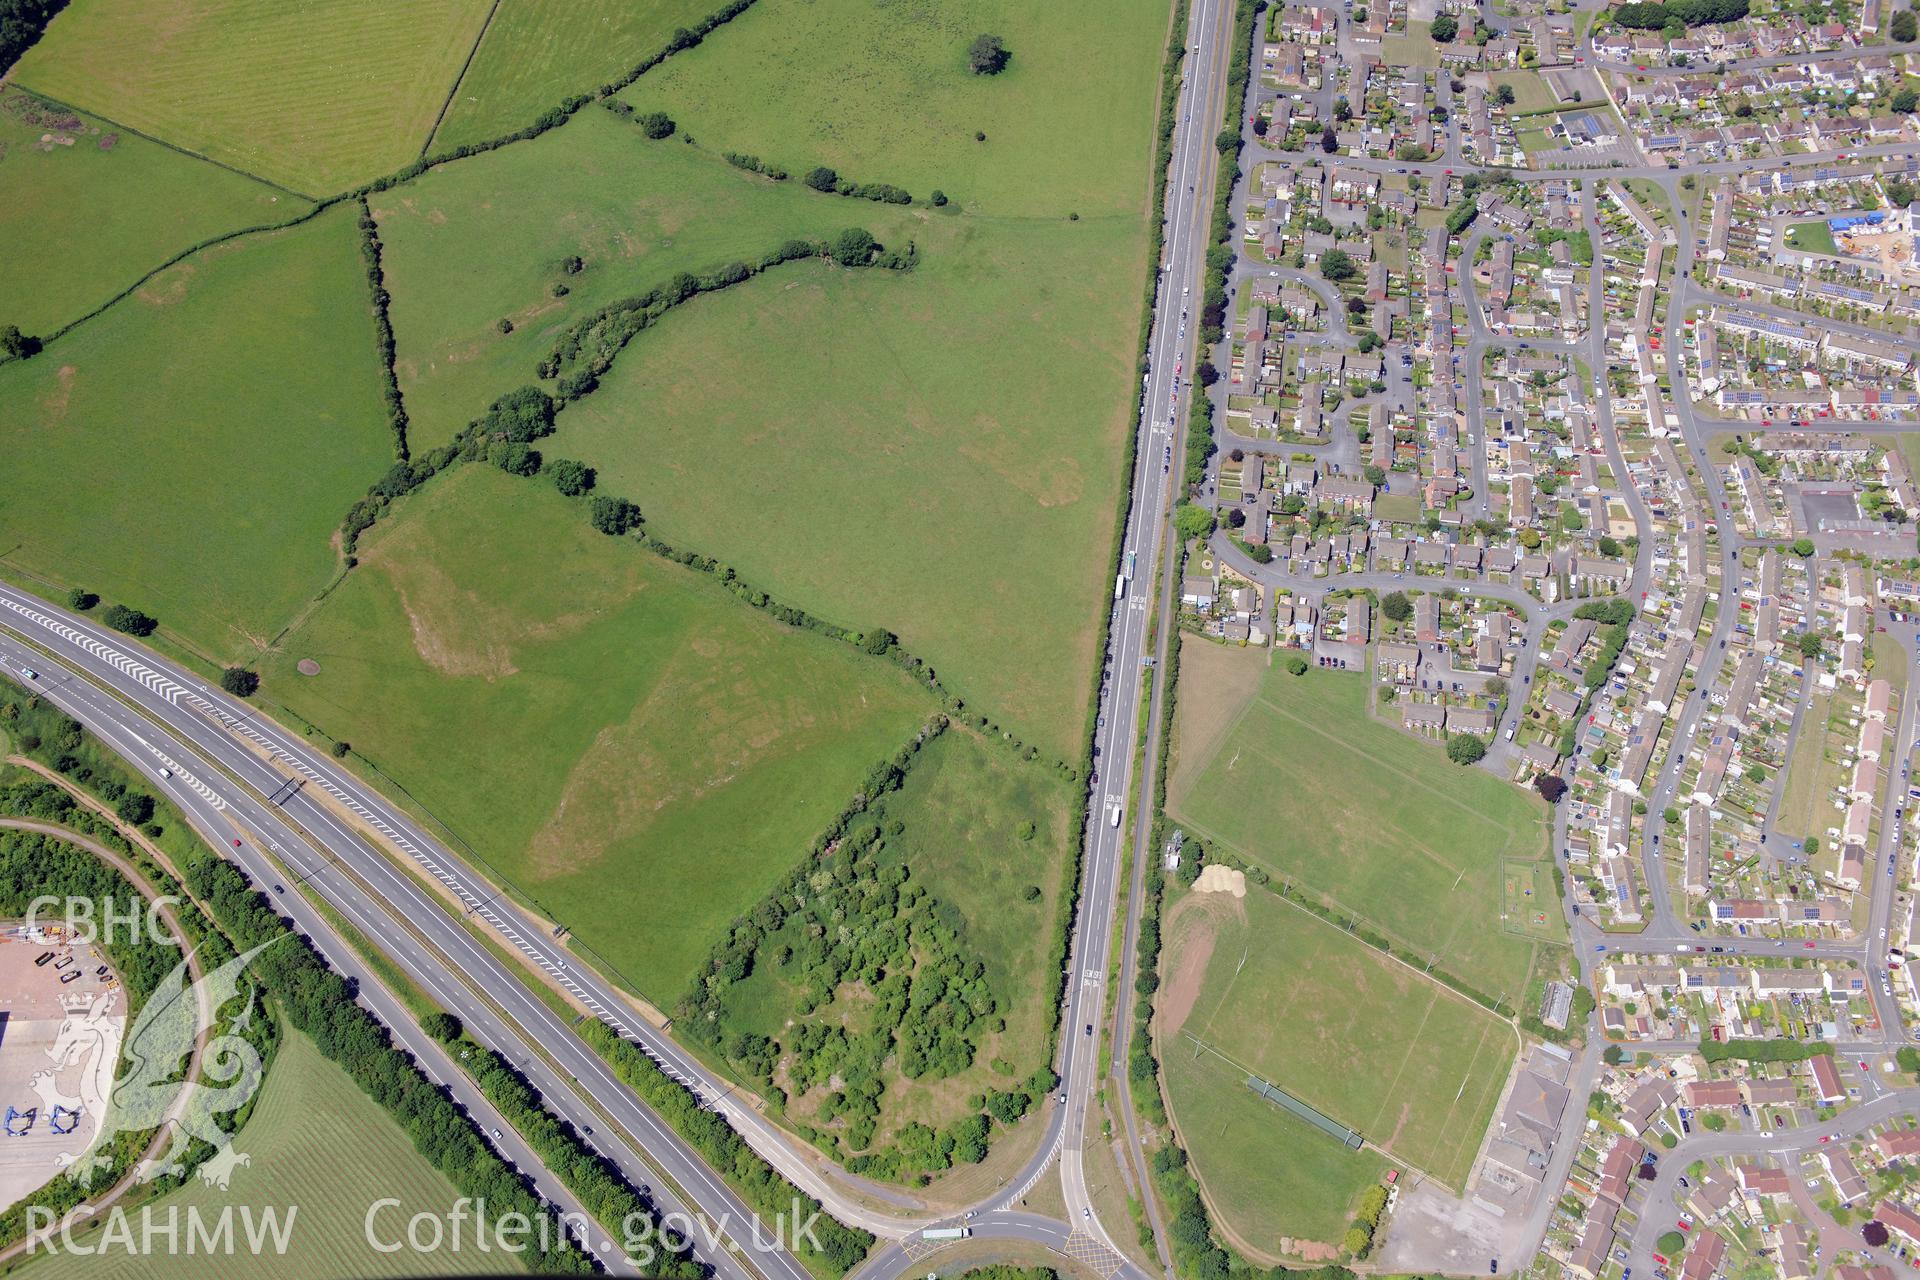 Upton Memorial Ground (home of Chepstow Rugby Football Club), Chepstow. Oblique aerial photograph taken during the Royal Commission's programme of archaeological aerial reconnaissance by Toby Driver on 29th June 2015.